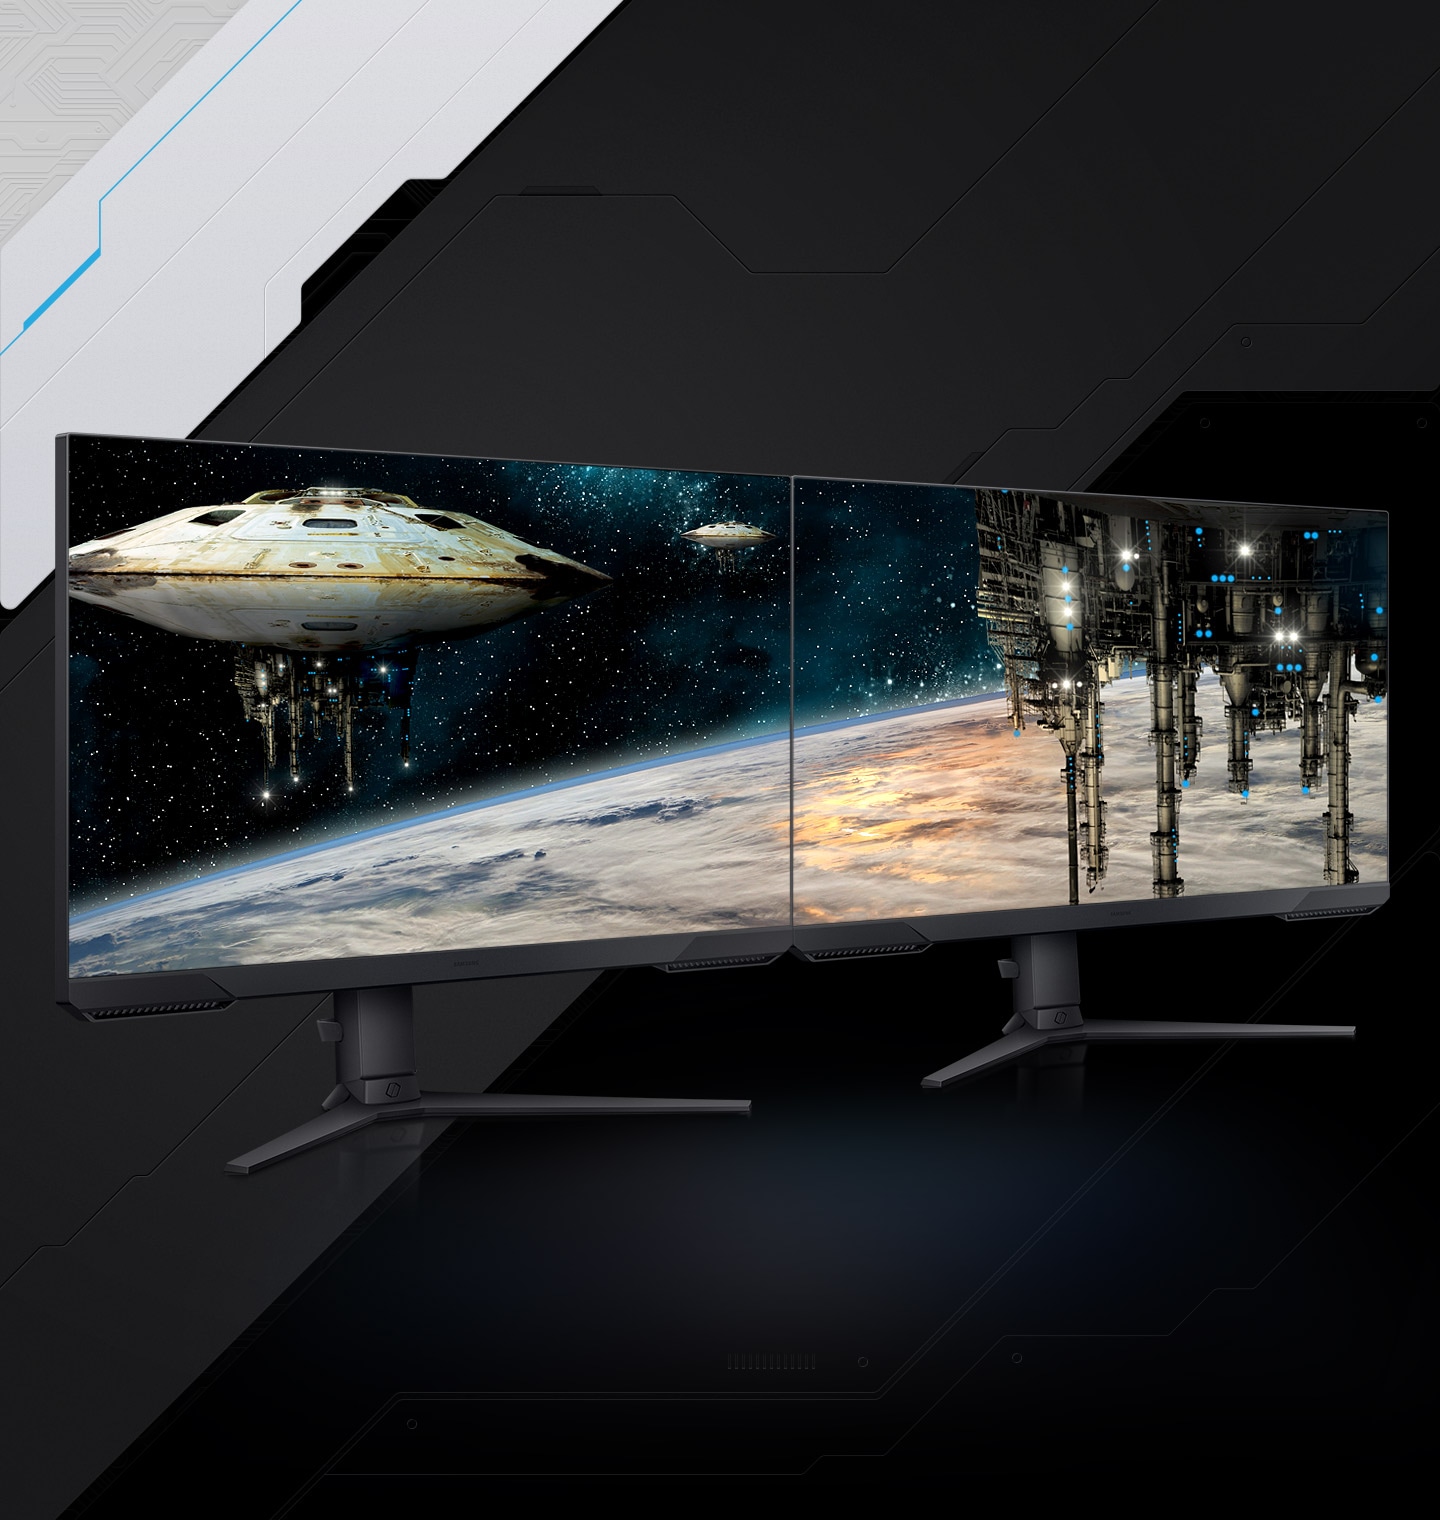 Two monitors are shown side-by-side projecting a cohesive scene of spaceships floating above a shining planet. The bezels between the left and right monitors are very thin compared to the overall picture, providing the same impression as a single ultra-wide monitor.